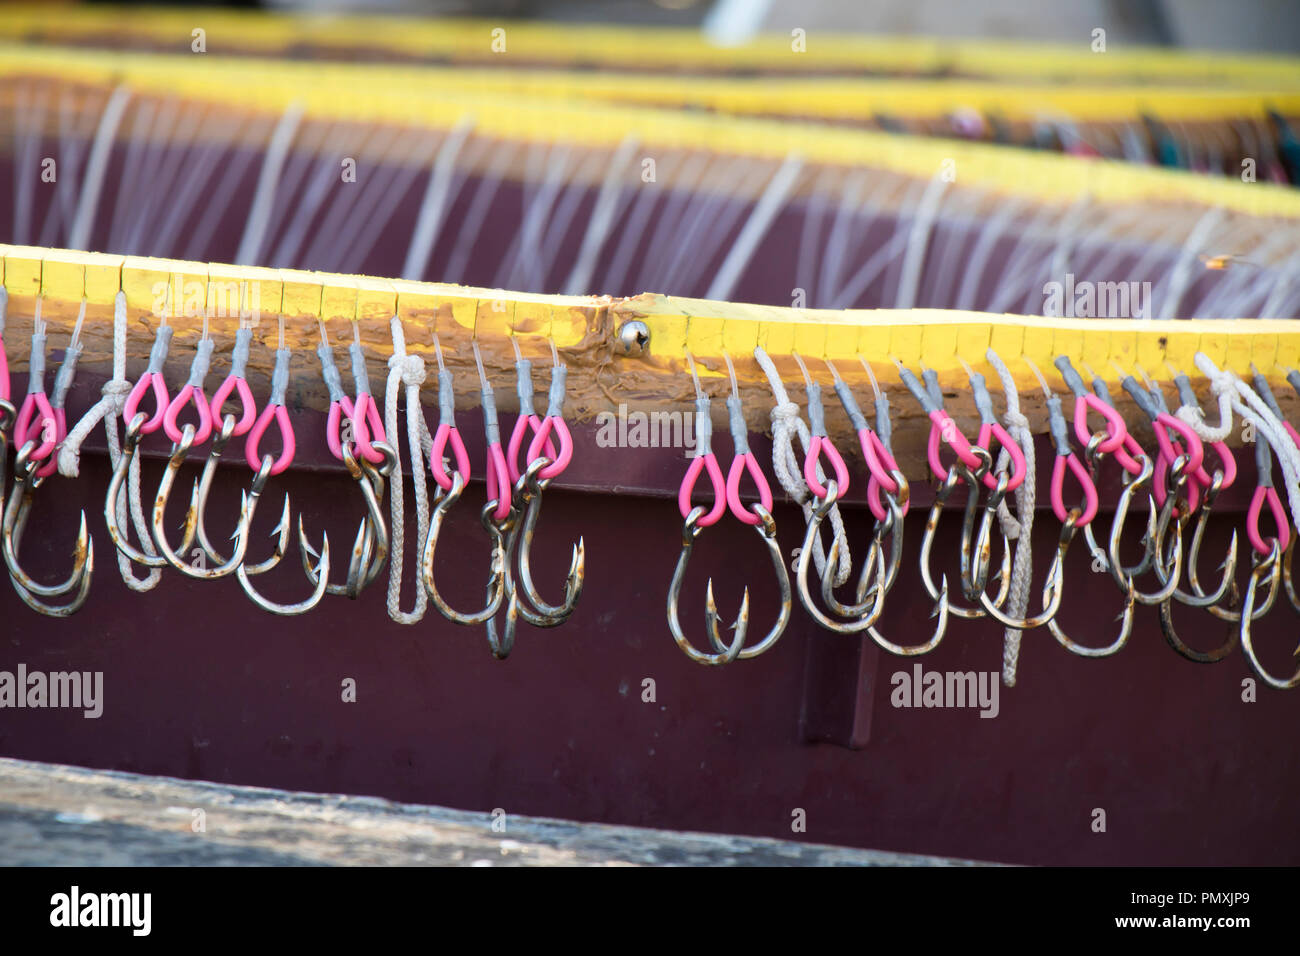 https://c8.alamy.com/comp/PMXJP9/long-line-fishing-gear-containers-with-hooks-inside-a-boat-equipment-for-traditional-commercial-fishing-technique-in-adriatic-sea-PMXJP9.jpg